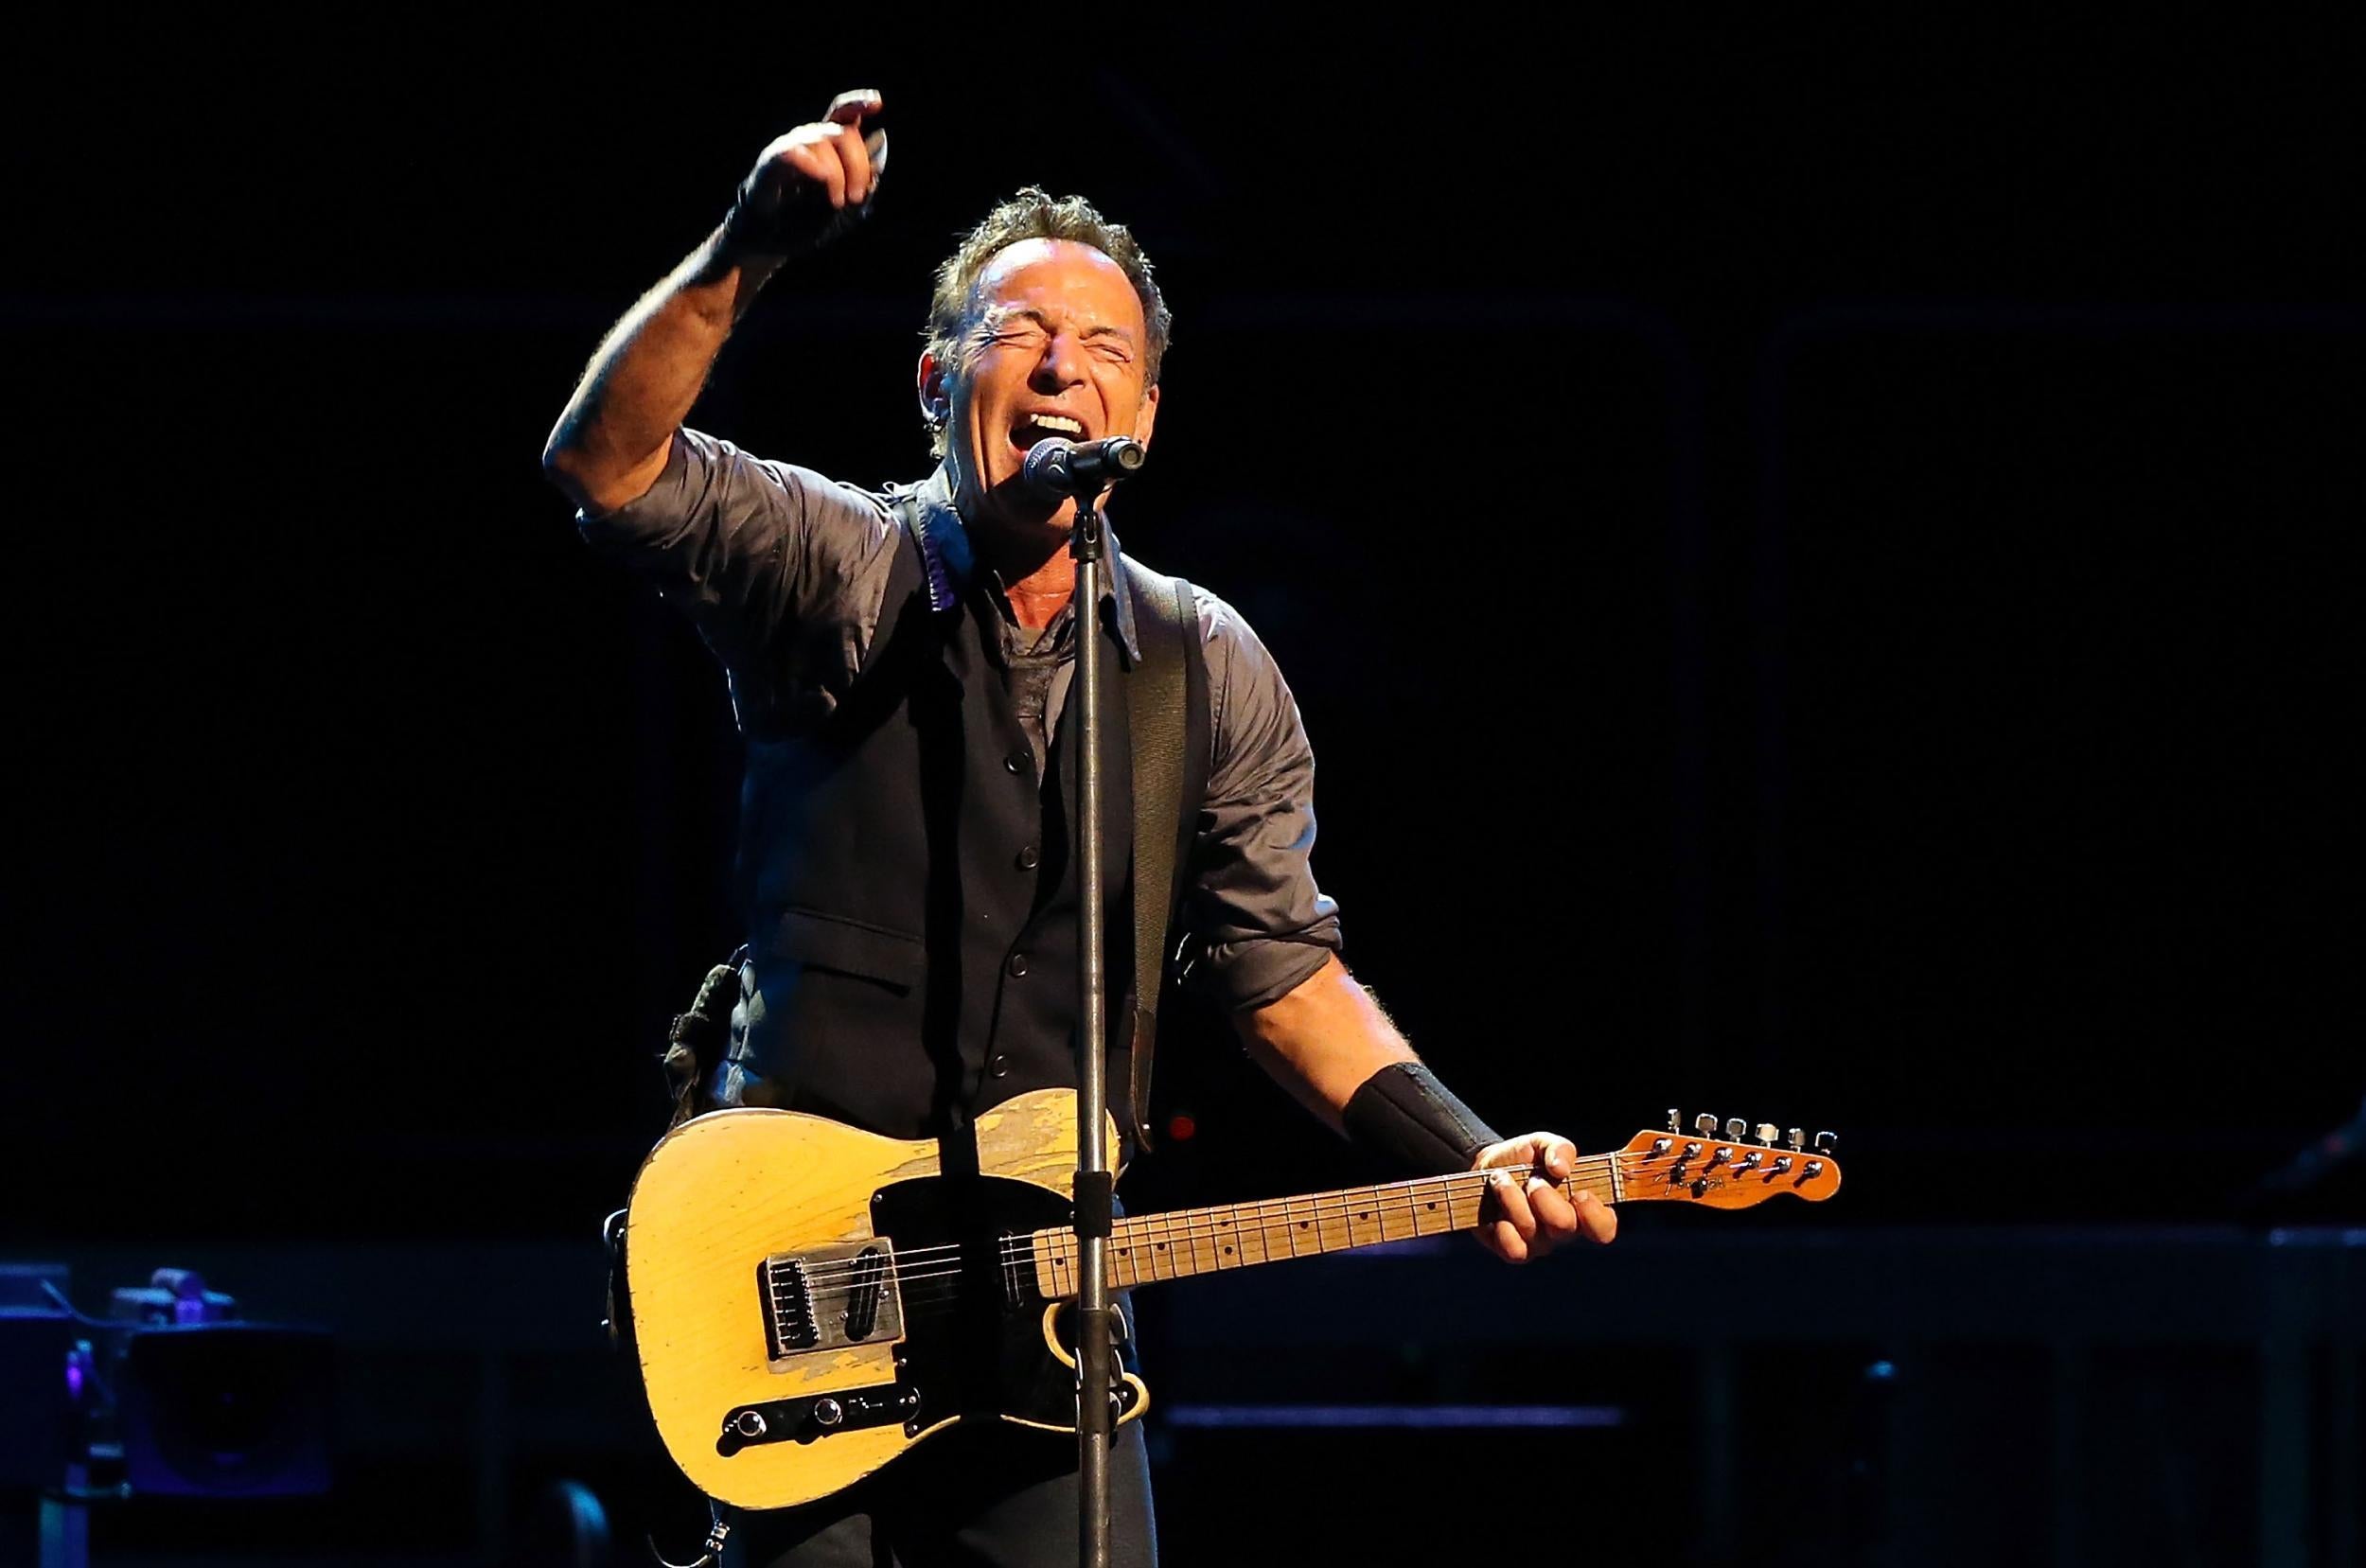 Springsteen, who endorsed Hillary Clinton during the election, said the people Mr Trump had chosen for his cabinet so far did not bode well for the future